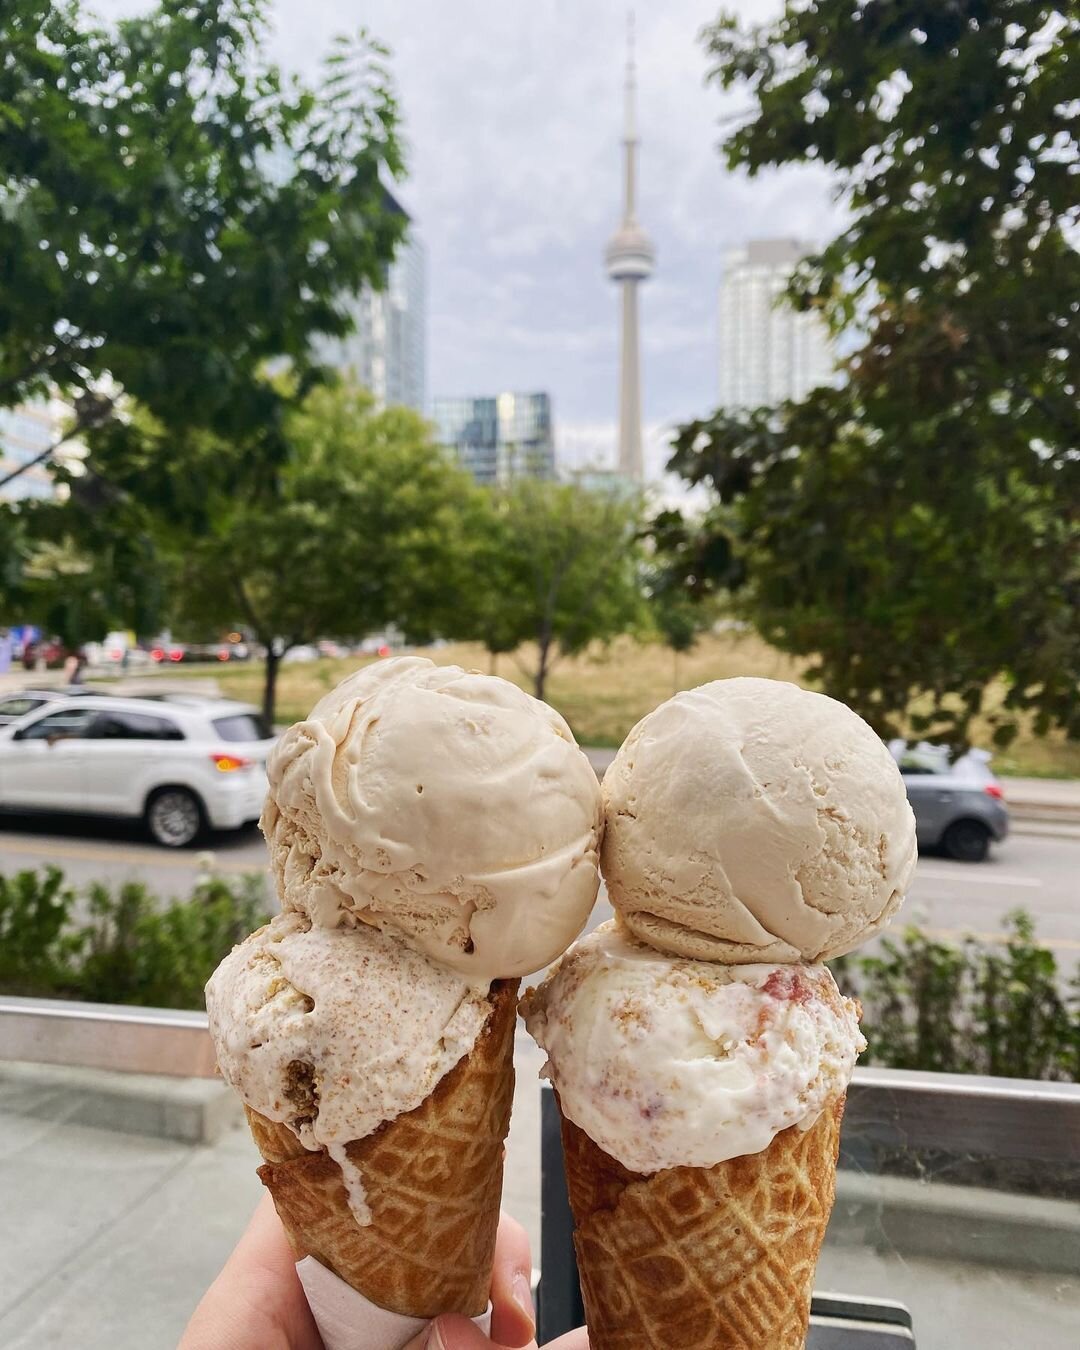 The perfect view 😍 

📍CityPlace: 113 Fort York Boulevard
📍Distillery District: 46 Gristmill Lane
📸 @halle.mikaela